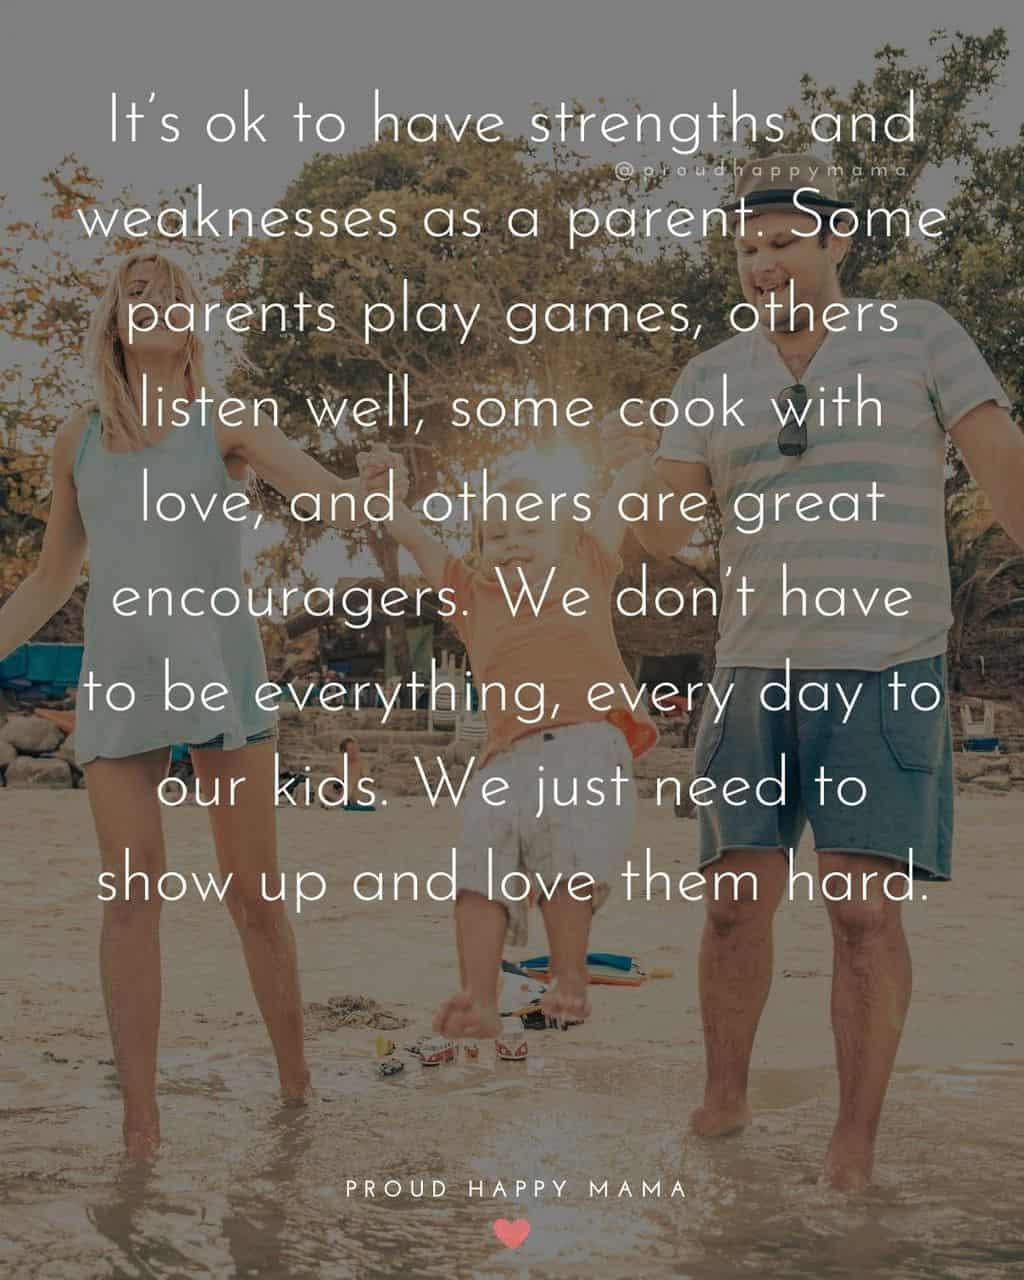 Parenting Quotes - It’s ok to have strengths and weaknesses as a parent. Some parents play games, others listen well, some cook with